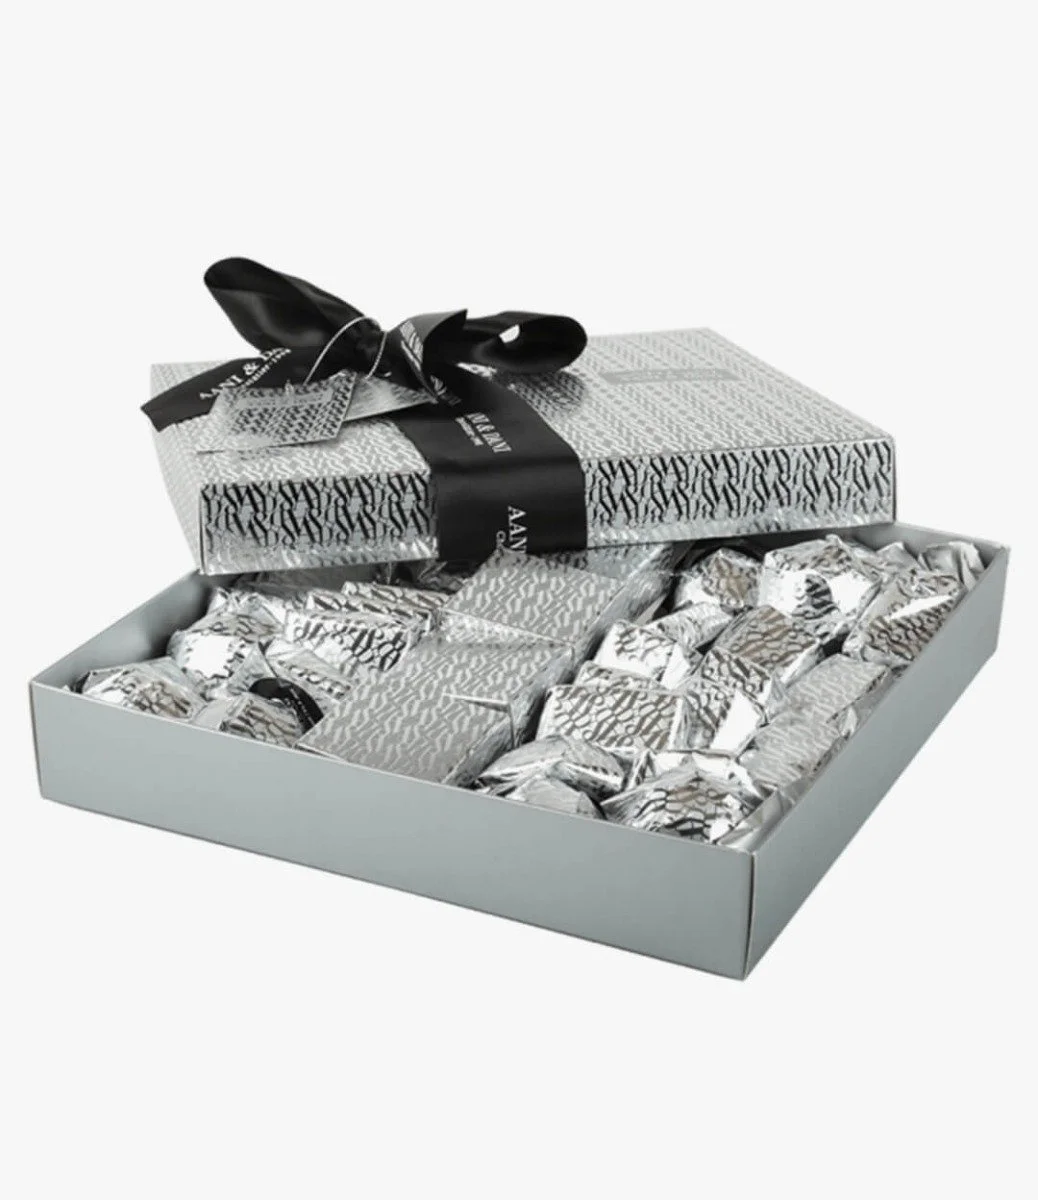 Special Chocolate Gift Silver Box - Medium by Aani & Dani